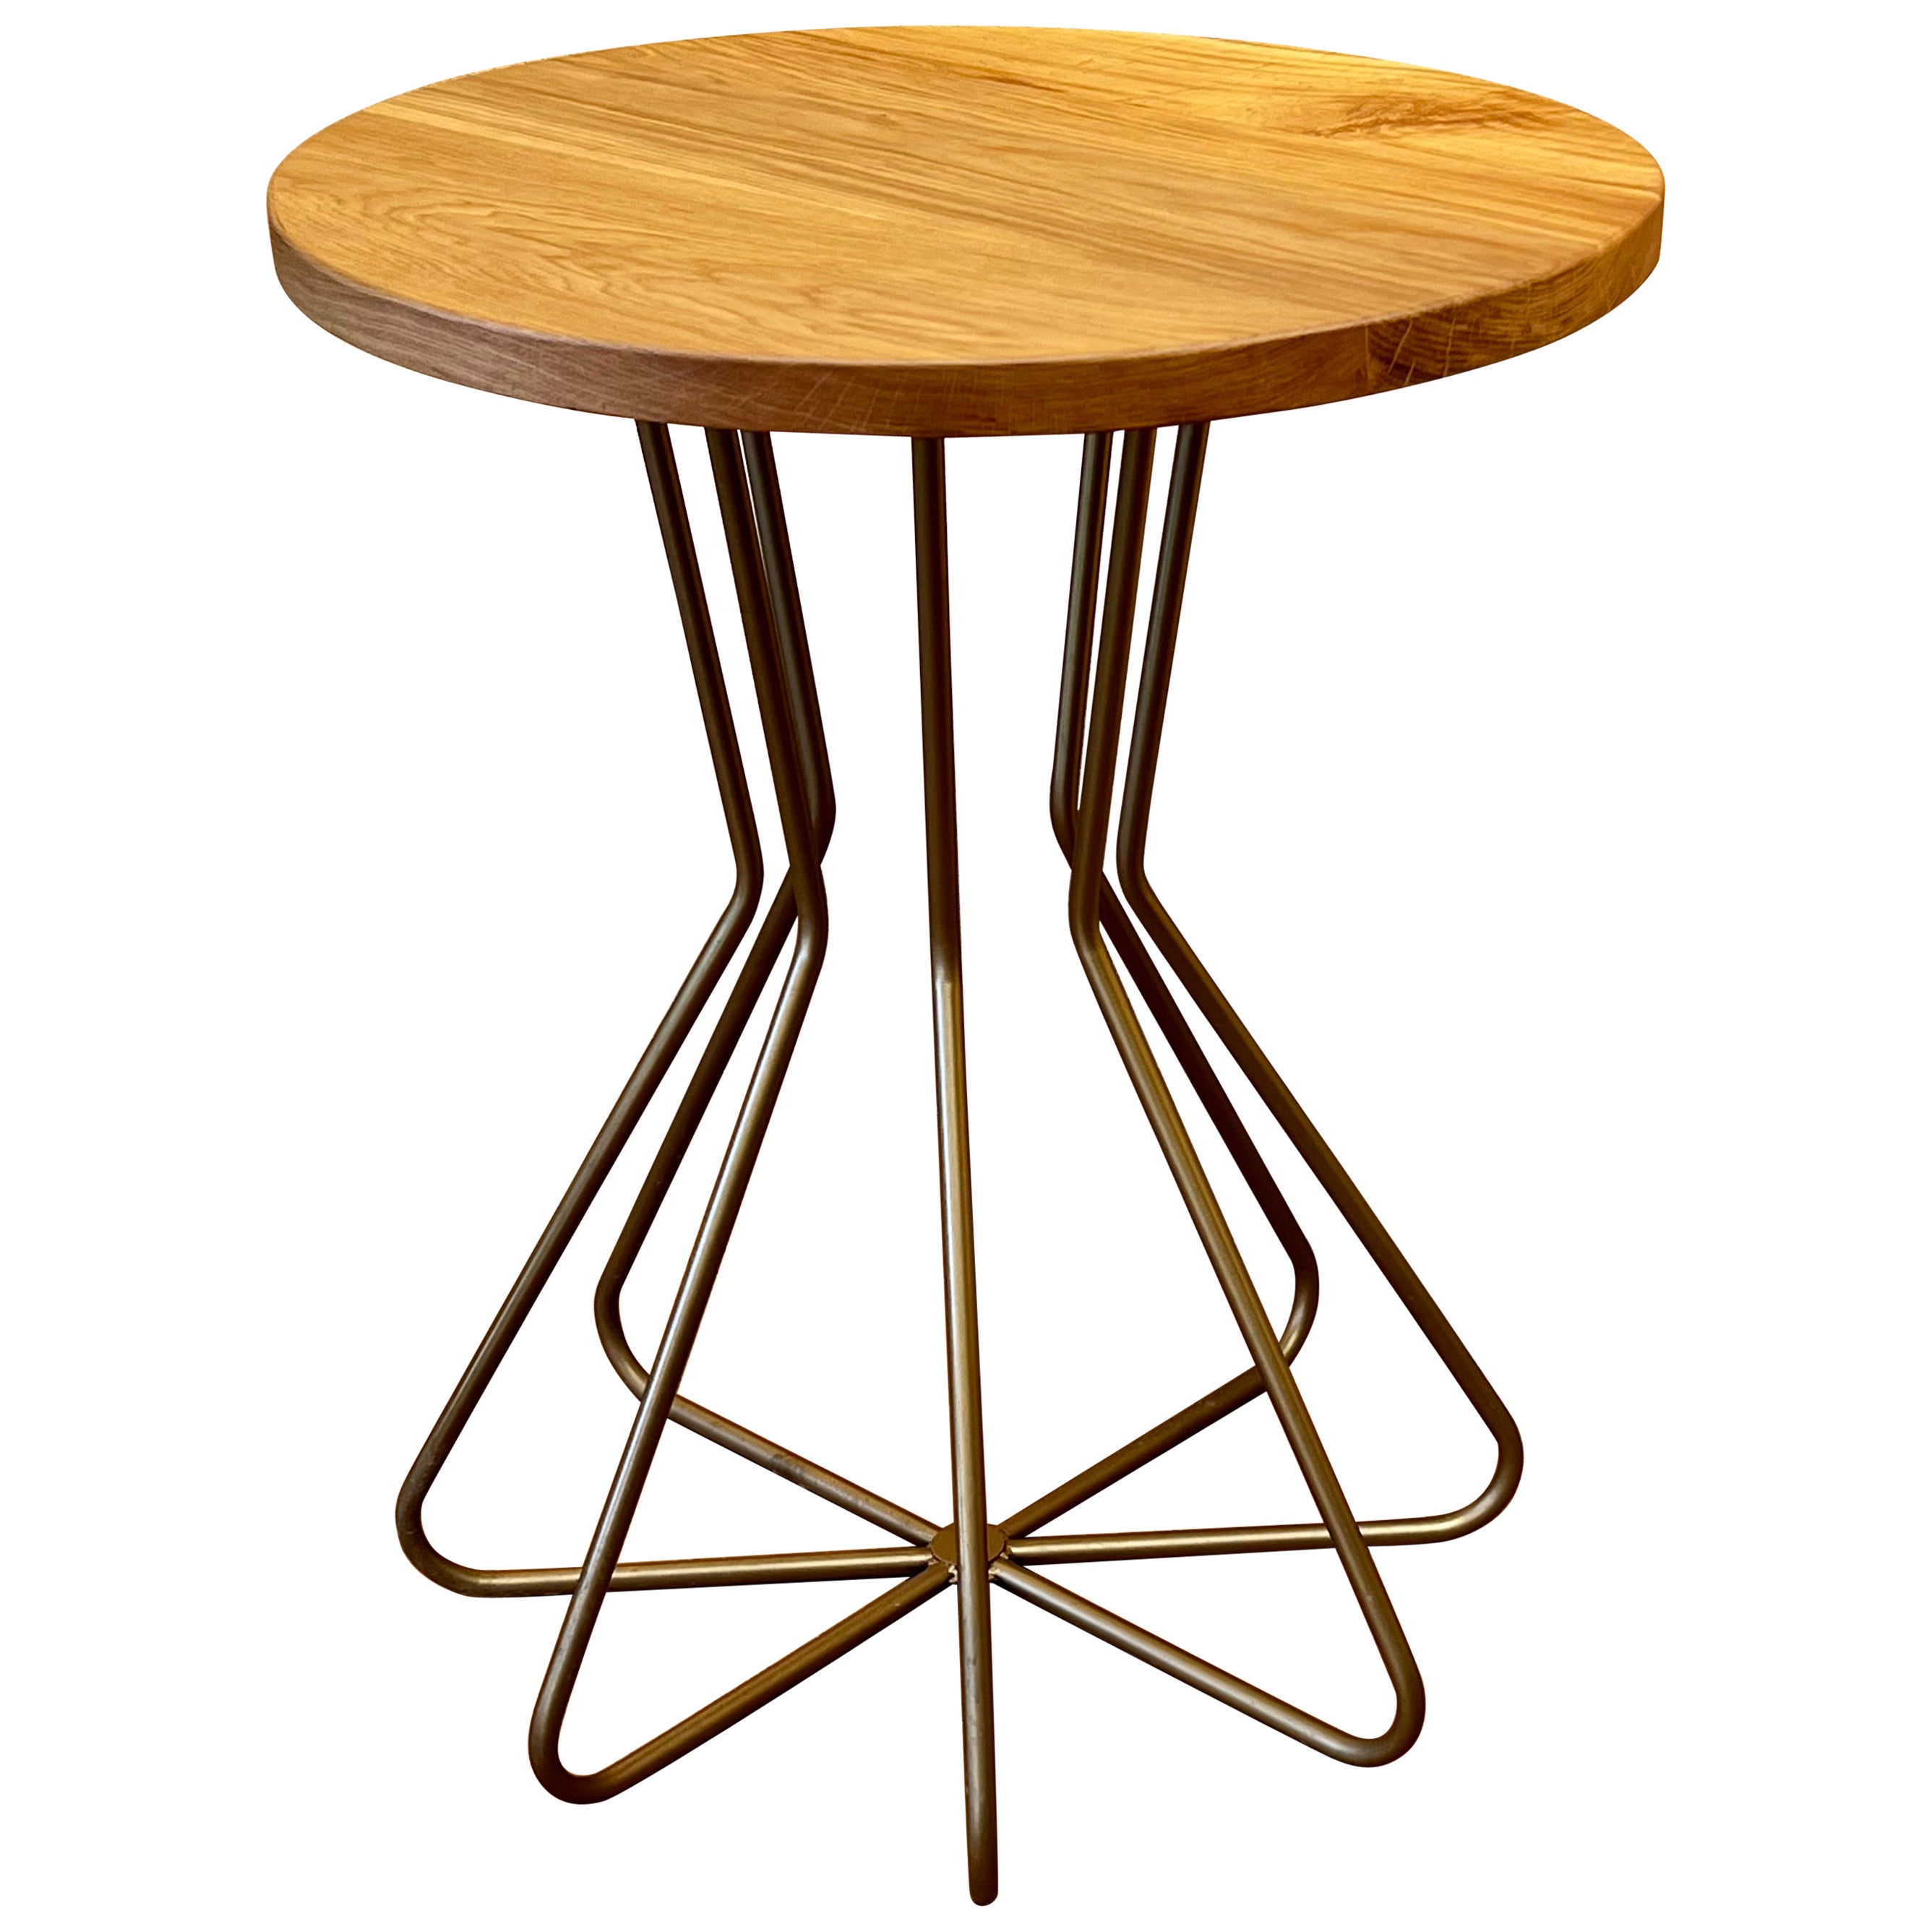 New Metal Fleur Side Table with Wood Top, Indoor and Outdoor